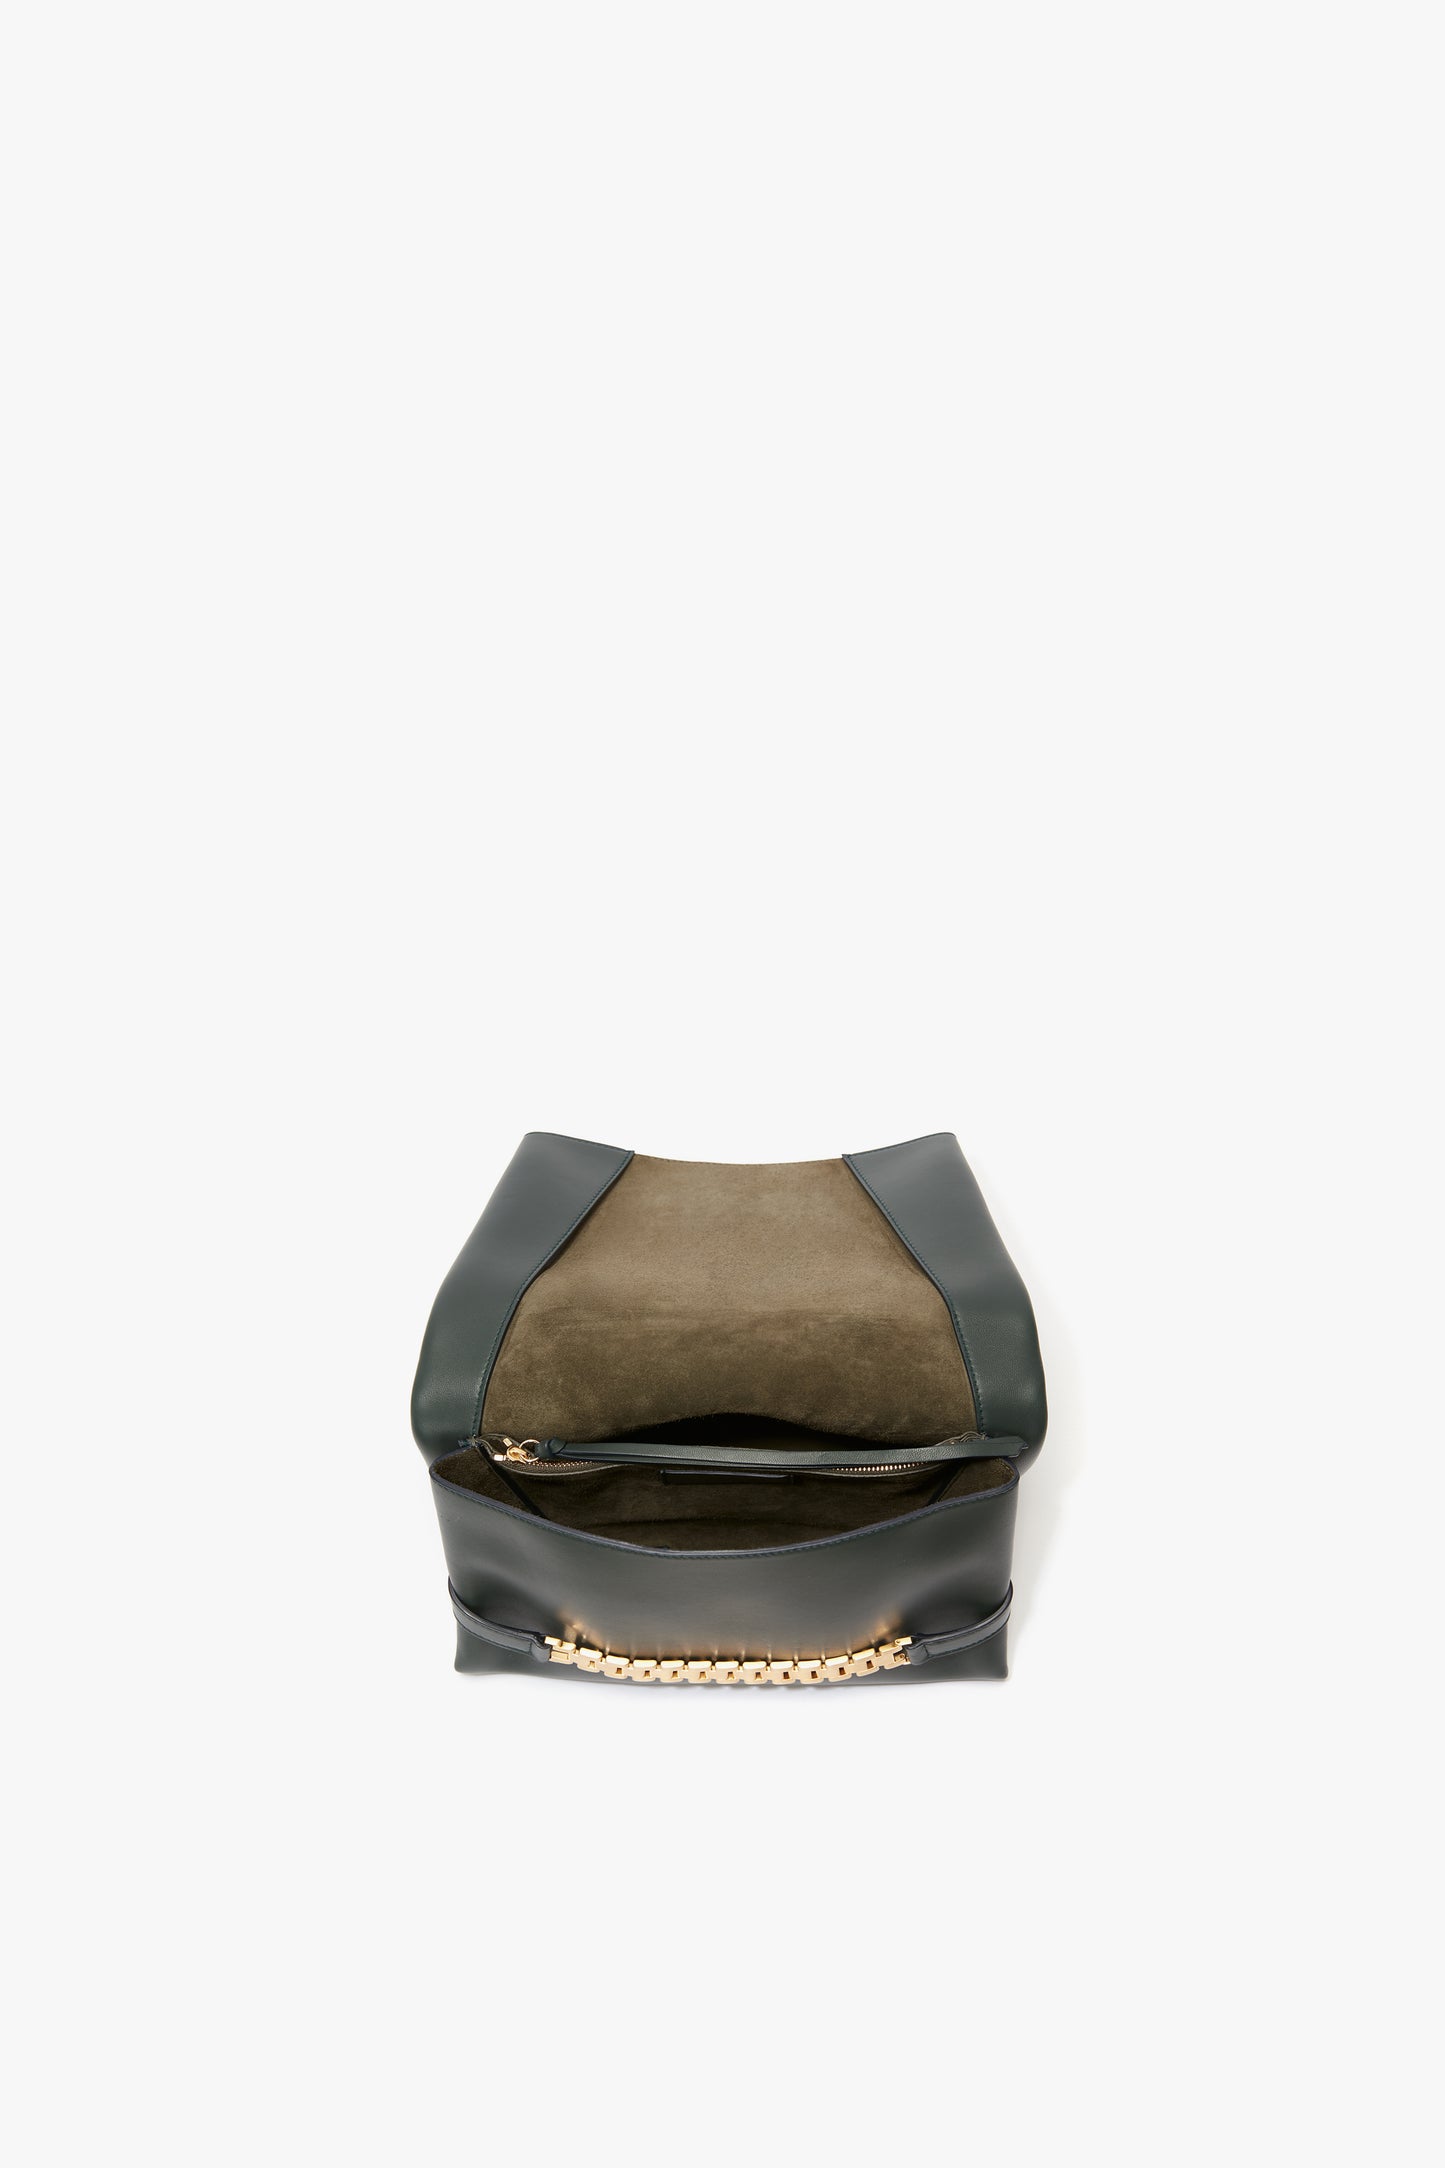 A black and beige Victoria Beckham Chain Pouch bag with a gold-tone hardware detail, displayed against a white background.